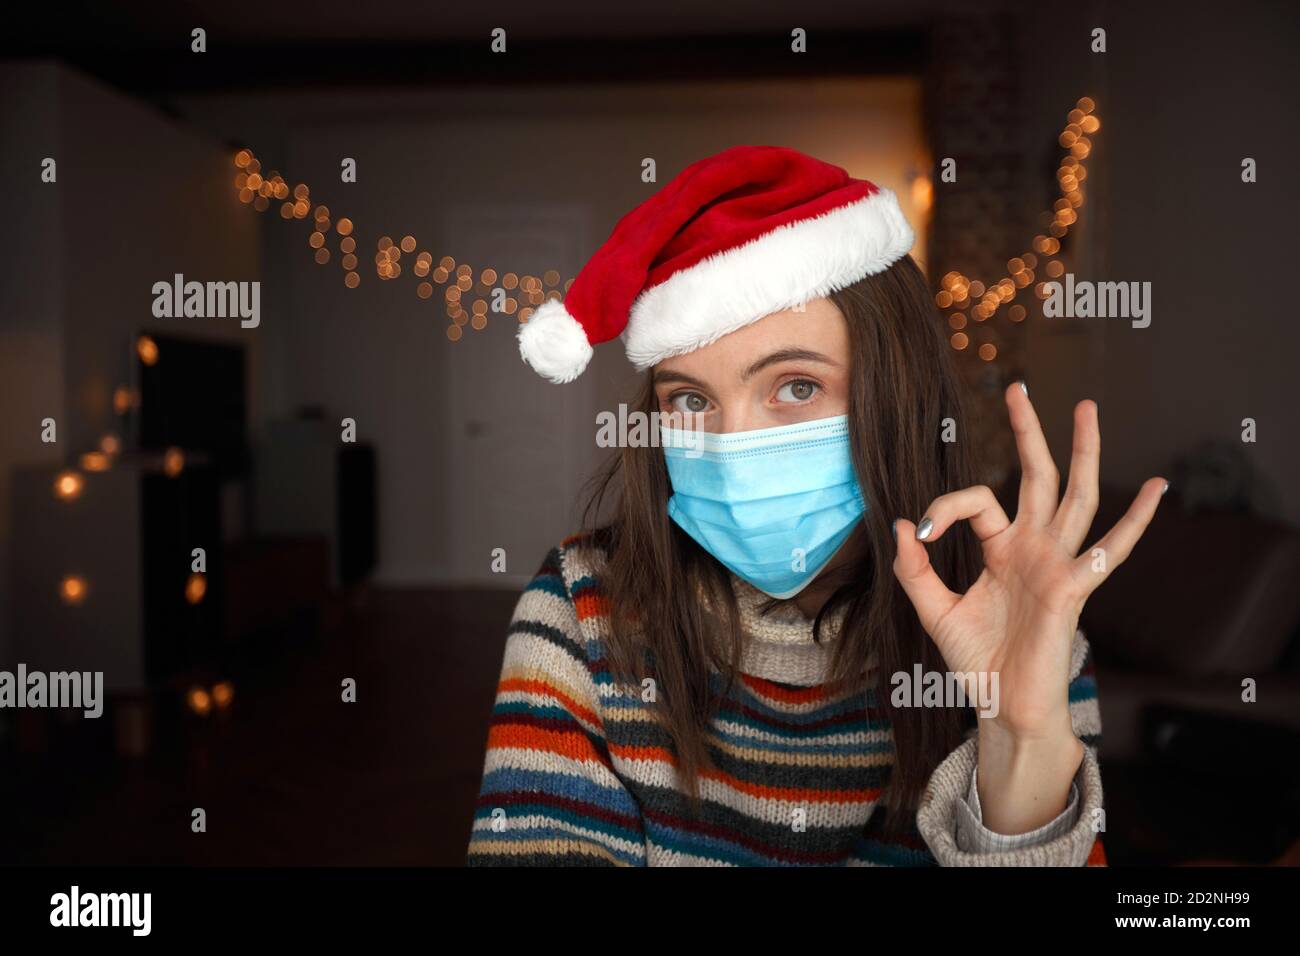 Cheerful woman in medical mask showing OK gesture on Christmas day Stock Photo